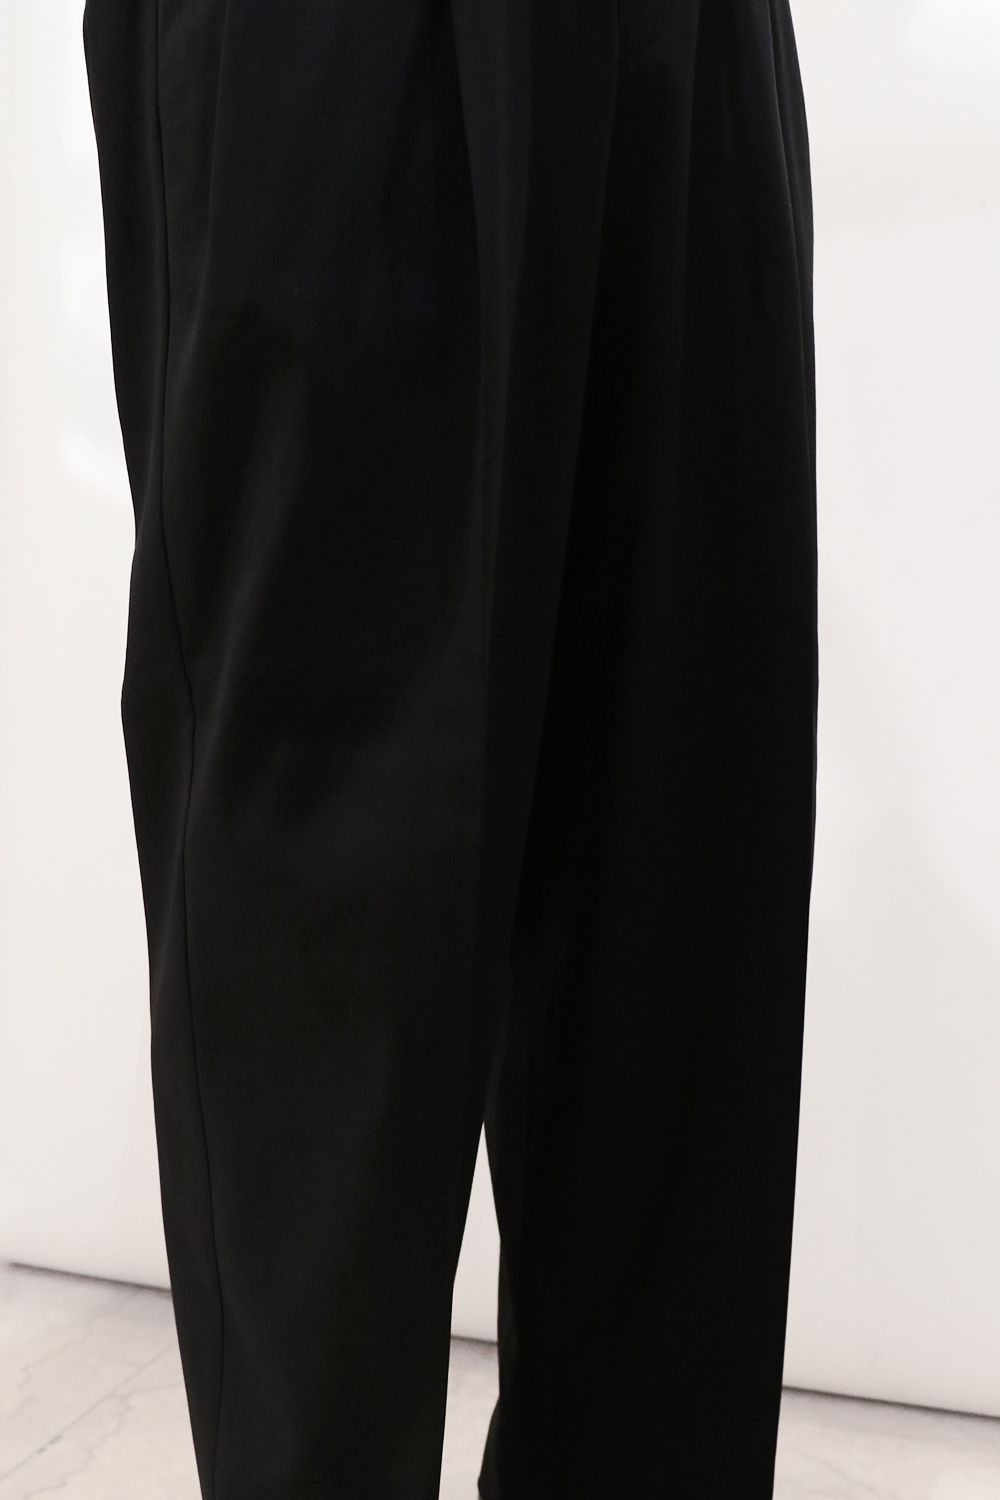 MARKAWARE - DRY VOILE TWILL DOUBLE PLEATED EASY TROUSERS / ドライ 